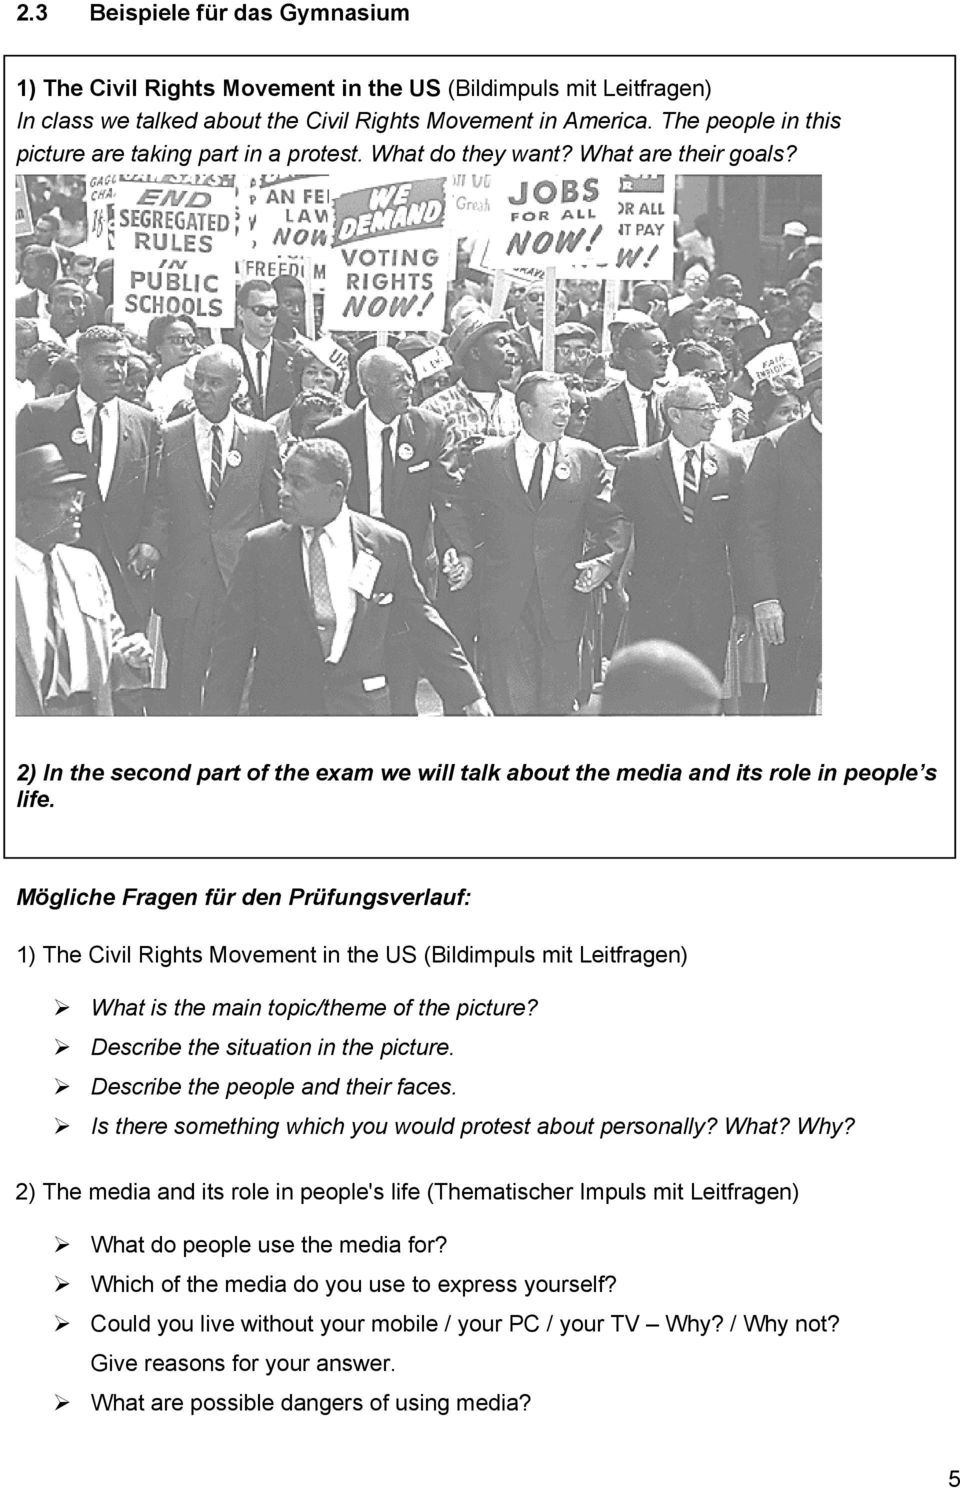 Mögliche Fragen für den Prüfungsverlauf: 1) The Civil Rights Movement in the US (Bildimpuls mit Leitfragen) What is the main topic/theme of the picture? Describe the situation in the picture.